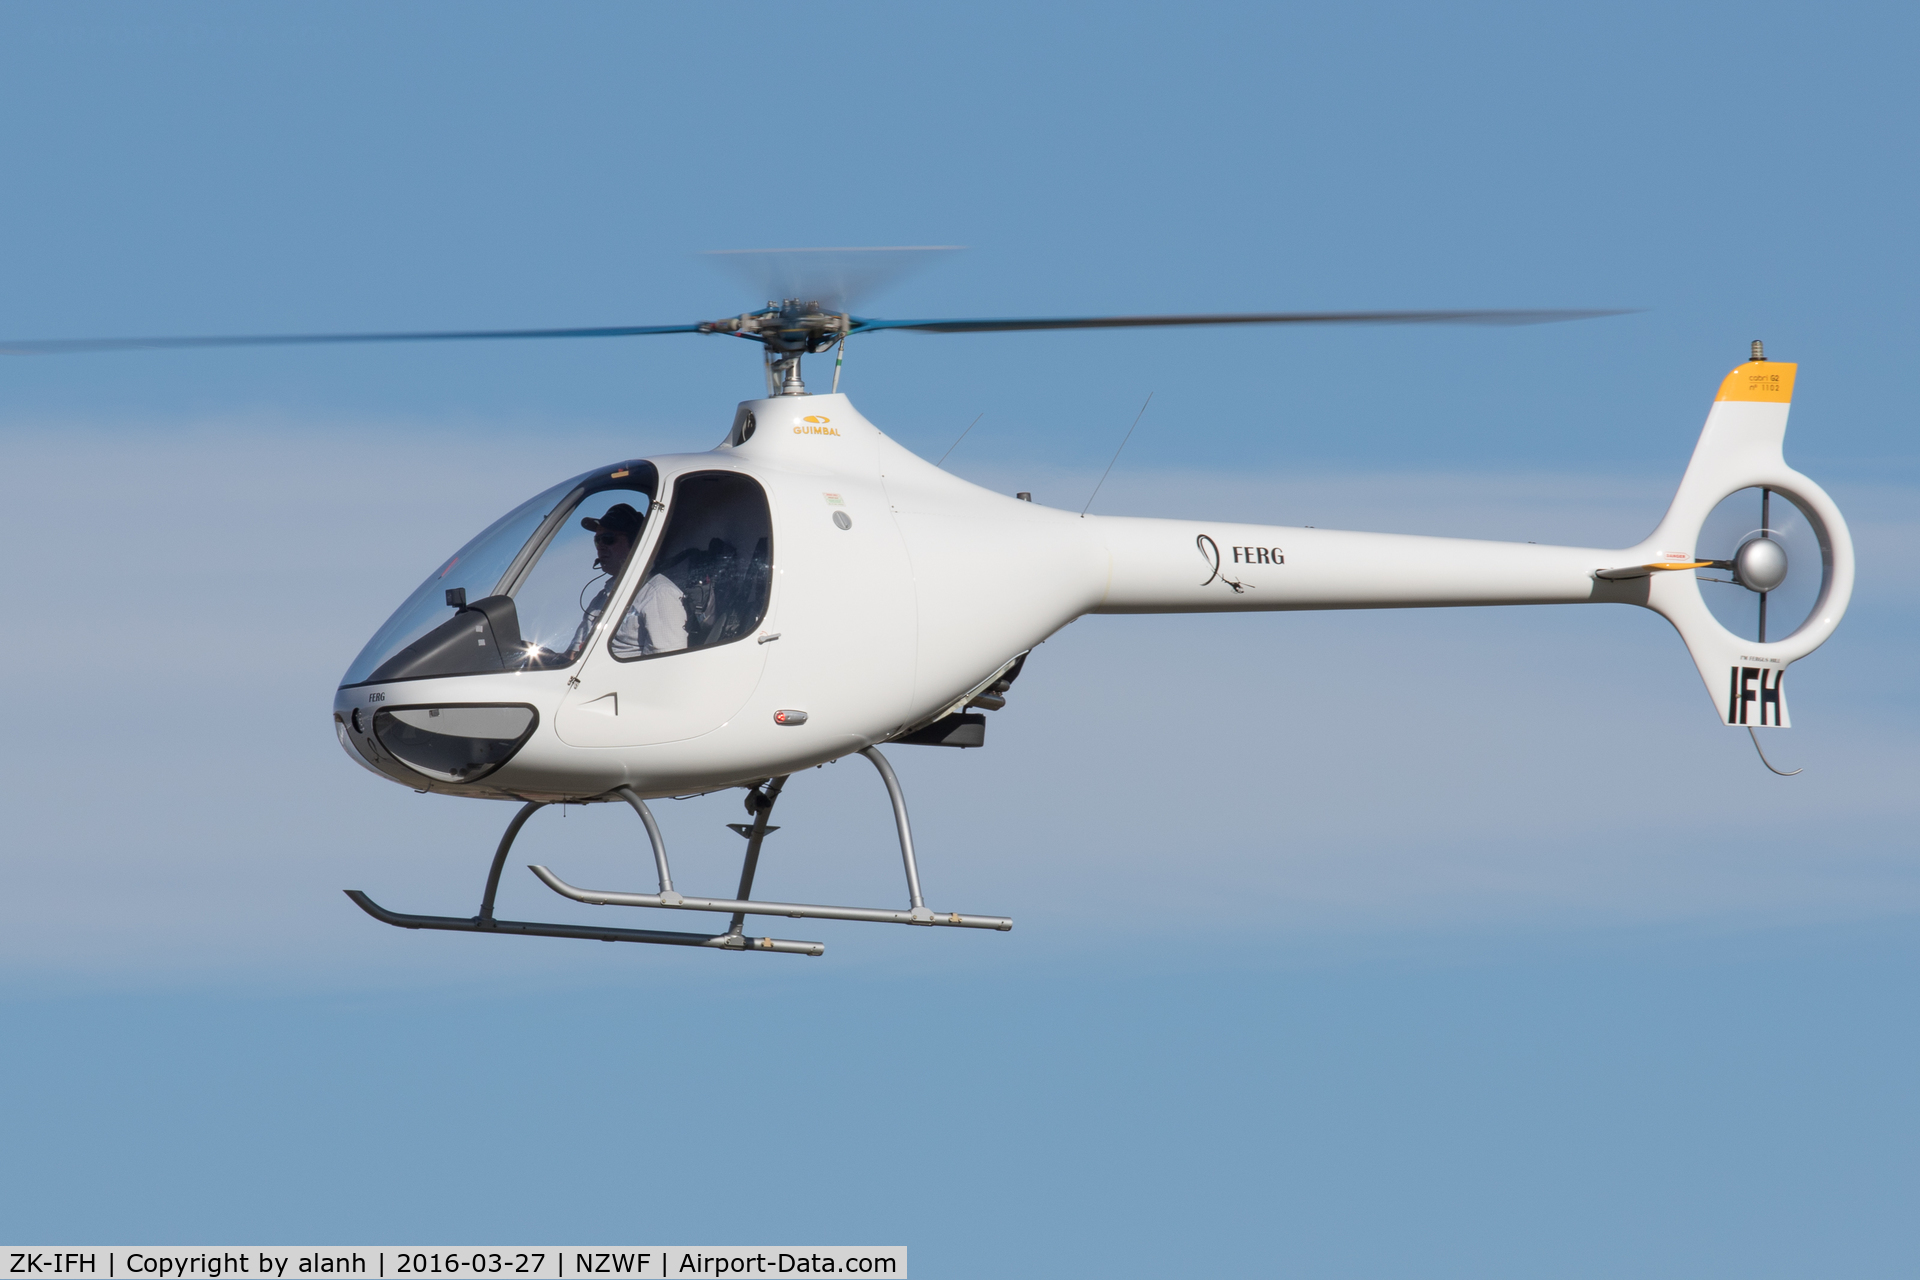 ZK-IFH, Guimbal Cabri G2 C/N 1102, Taking part in a parade of helicopters at Wings Over Wanaka